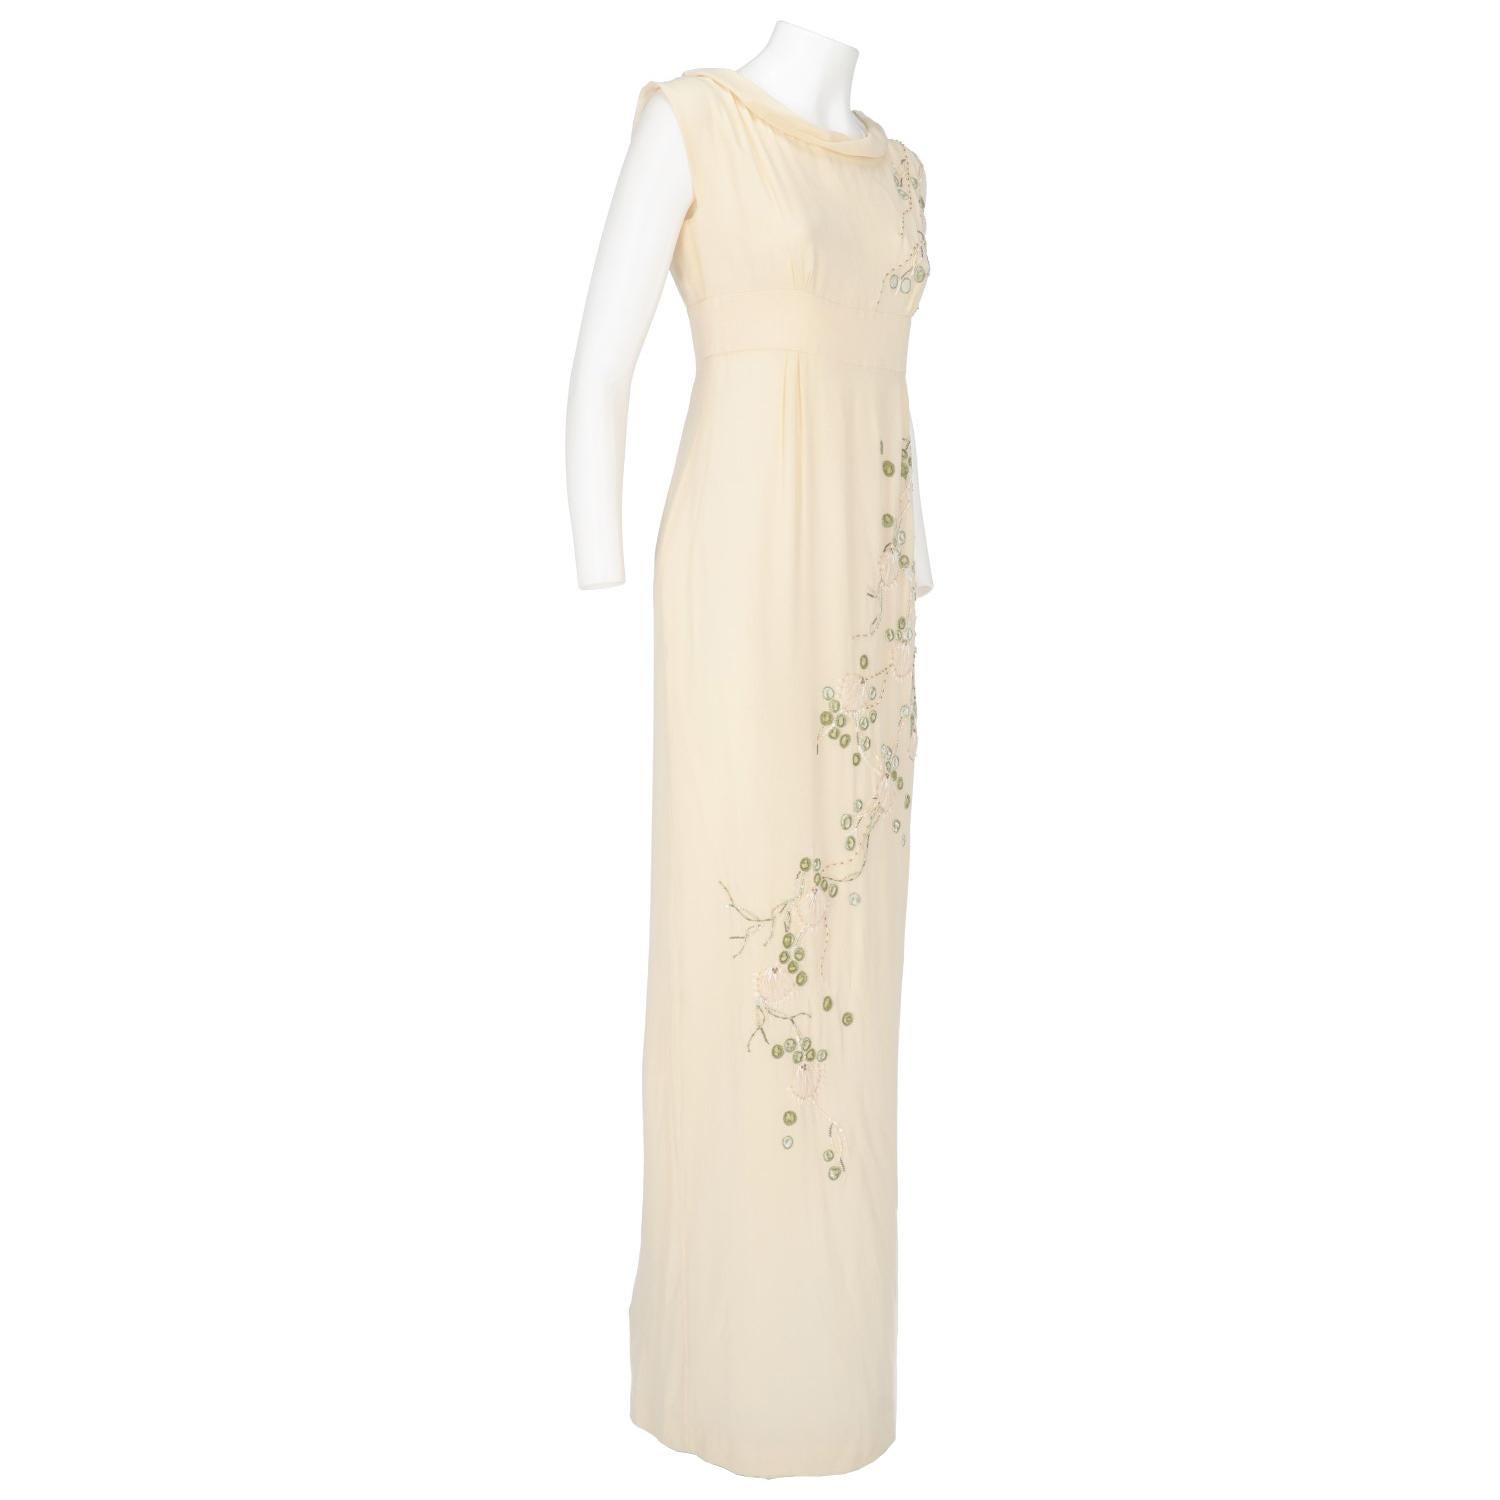 The elegant and romantic John Galliano ivory silk layered empire style wedding dress features a long slit on the side and a buttoned side fastening. The neckline is lightly wide and all the dress is embellished by silver-tone sequins, white pearl